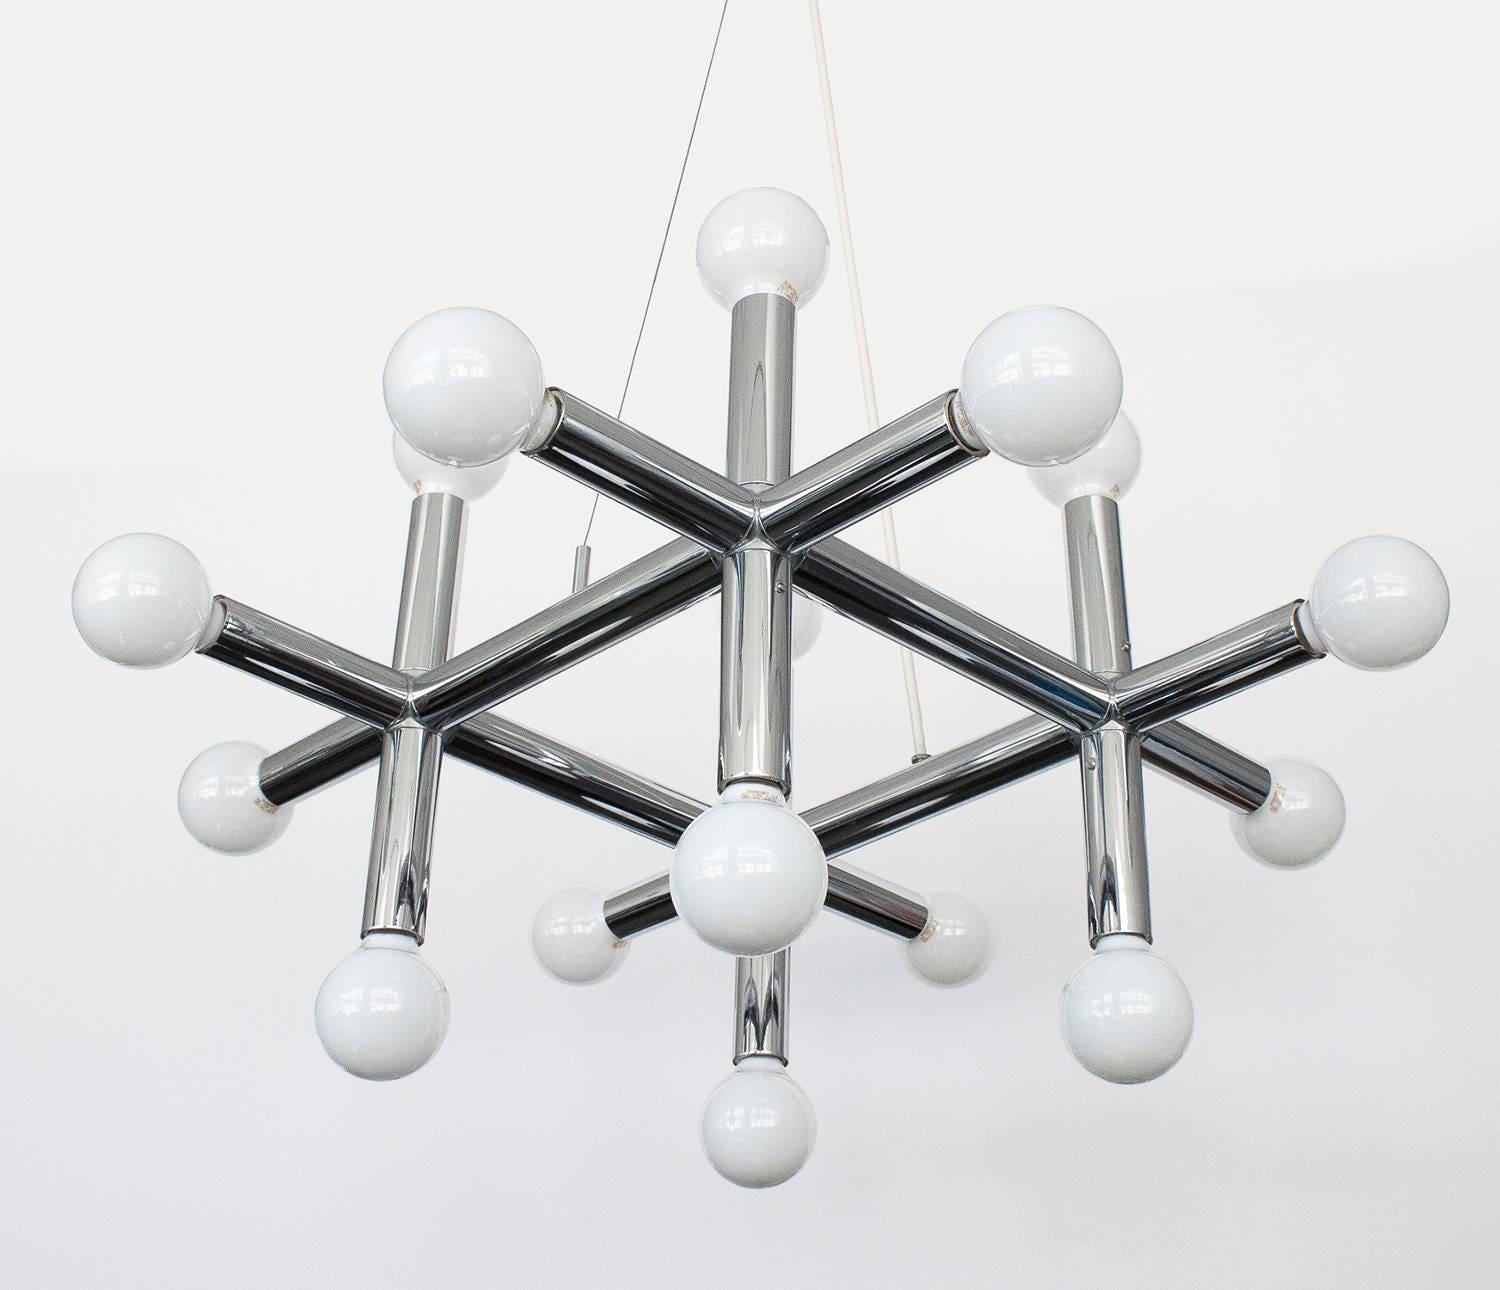 Lightolier chrome geometric chandelier. Grid form hashtag. Chrome-plated steel tubes create a hashtag formation with a bulb at each end. Takes 16 standard light bulbs. Round chrome canopy included. Suspended by white chord and steel wire.